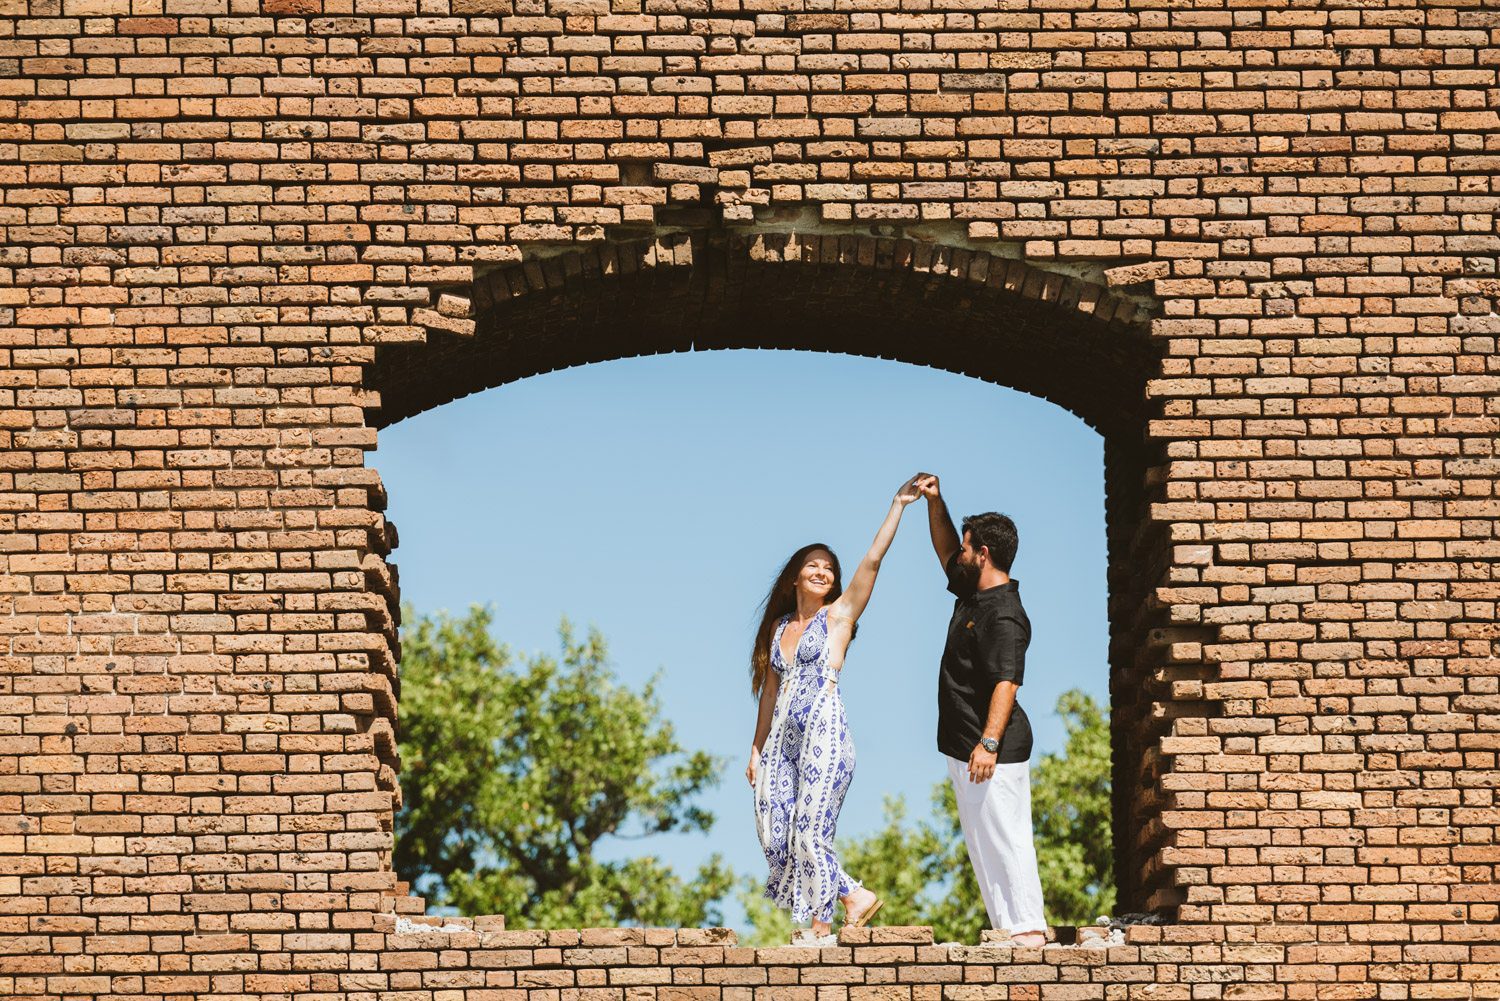 A man and woman standing in a brick archway during their destination engagement session.